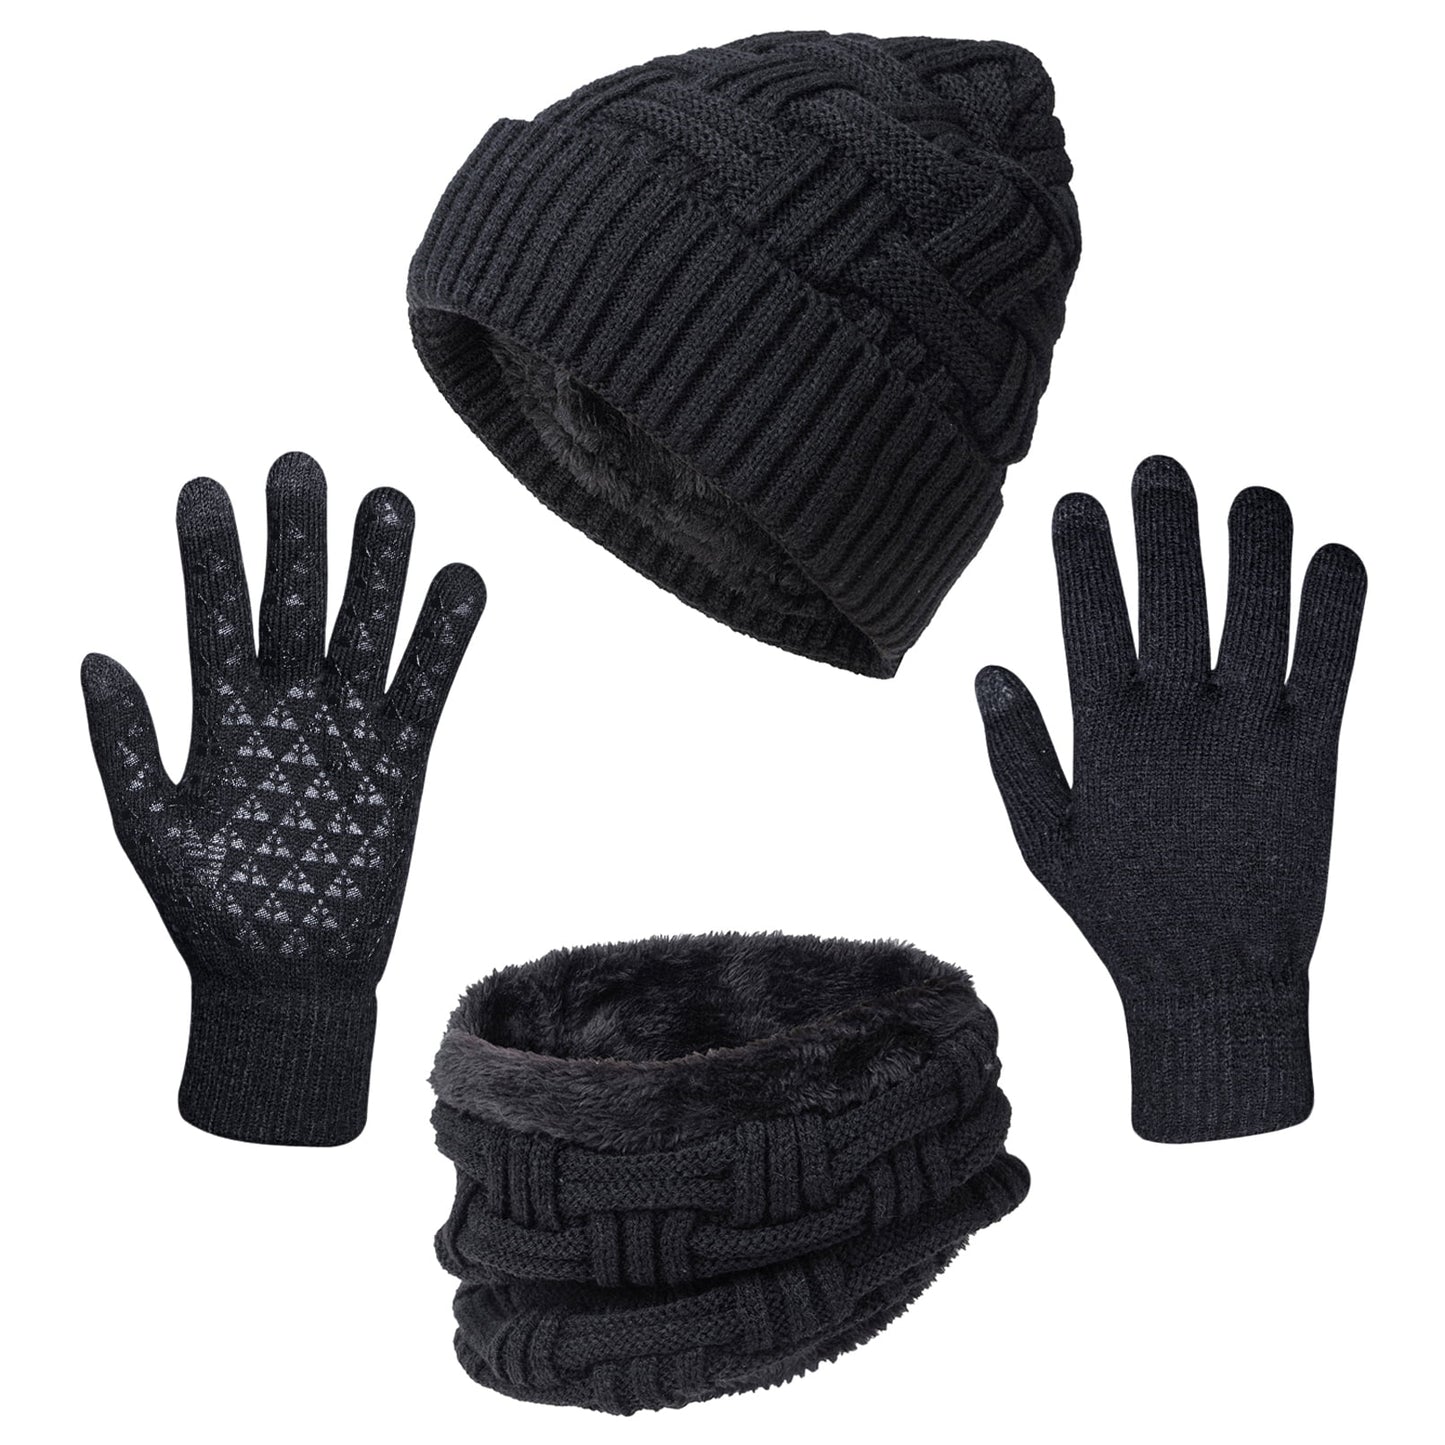 Loritta 3 Pacs Winter Beanie Hat Scarf and Touch Screen Gloves Set for Men Women